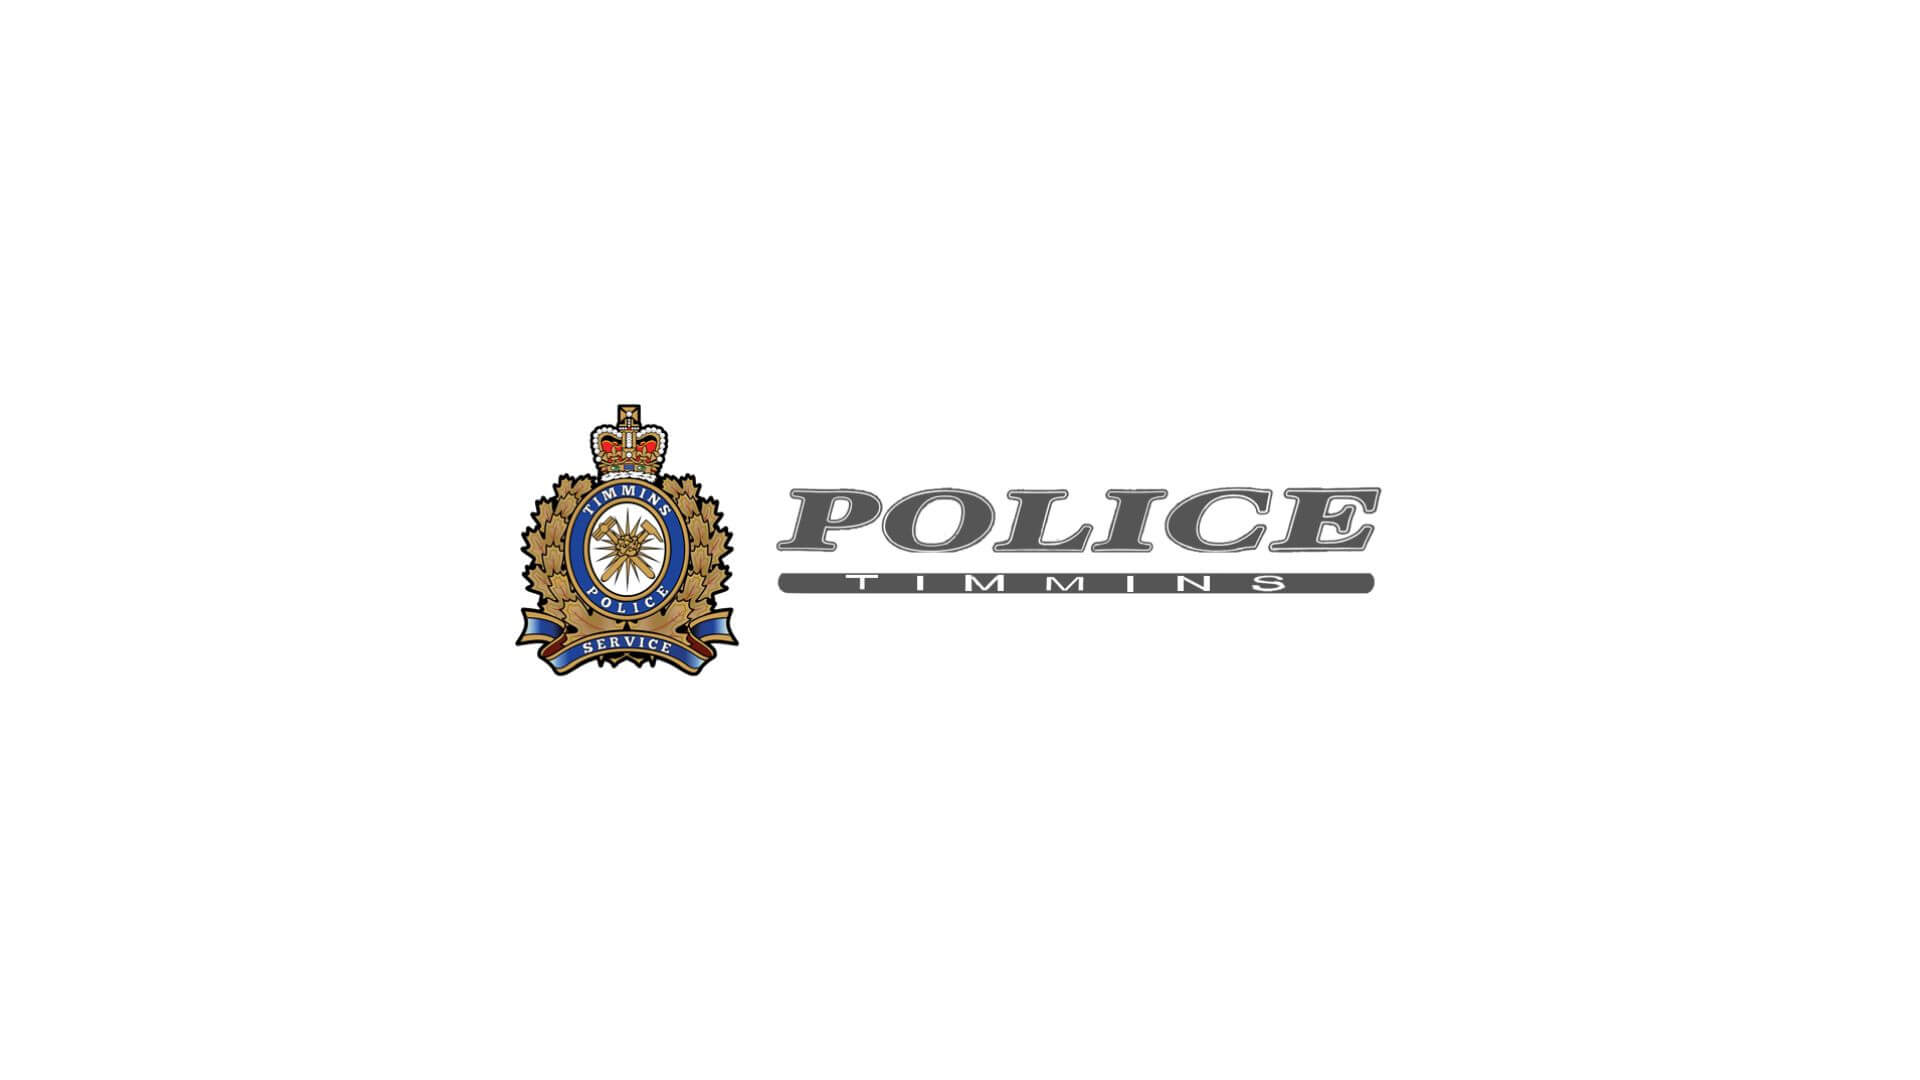 Timmins Care Logo of the Timmins Police Service, featuring a badge and the word "police" prominently displayed in Cochrane District. Cochrane District Social Services Administration Board